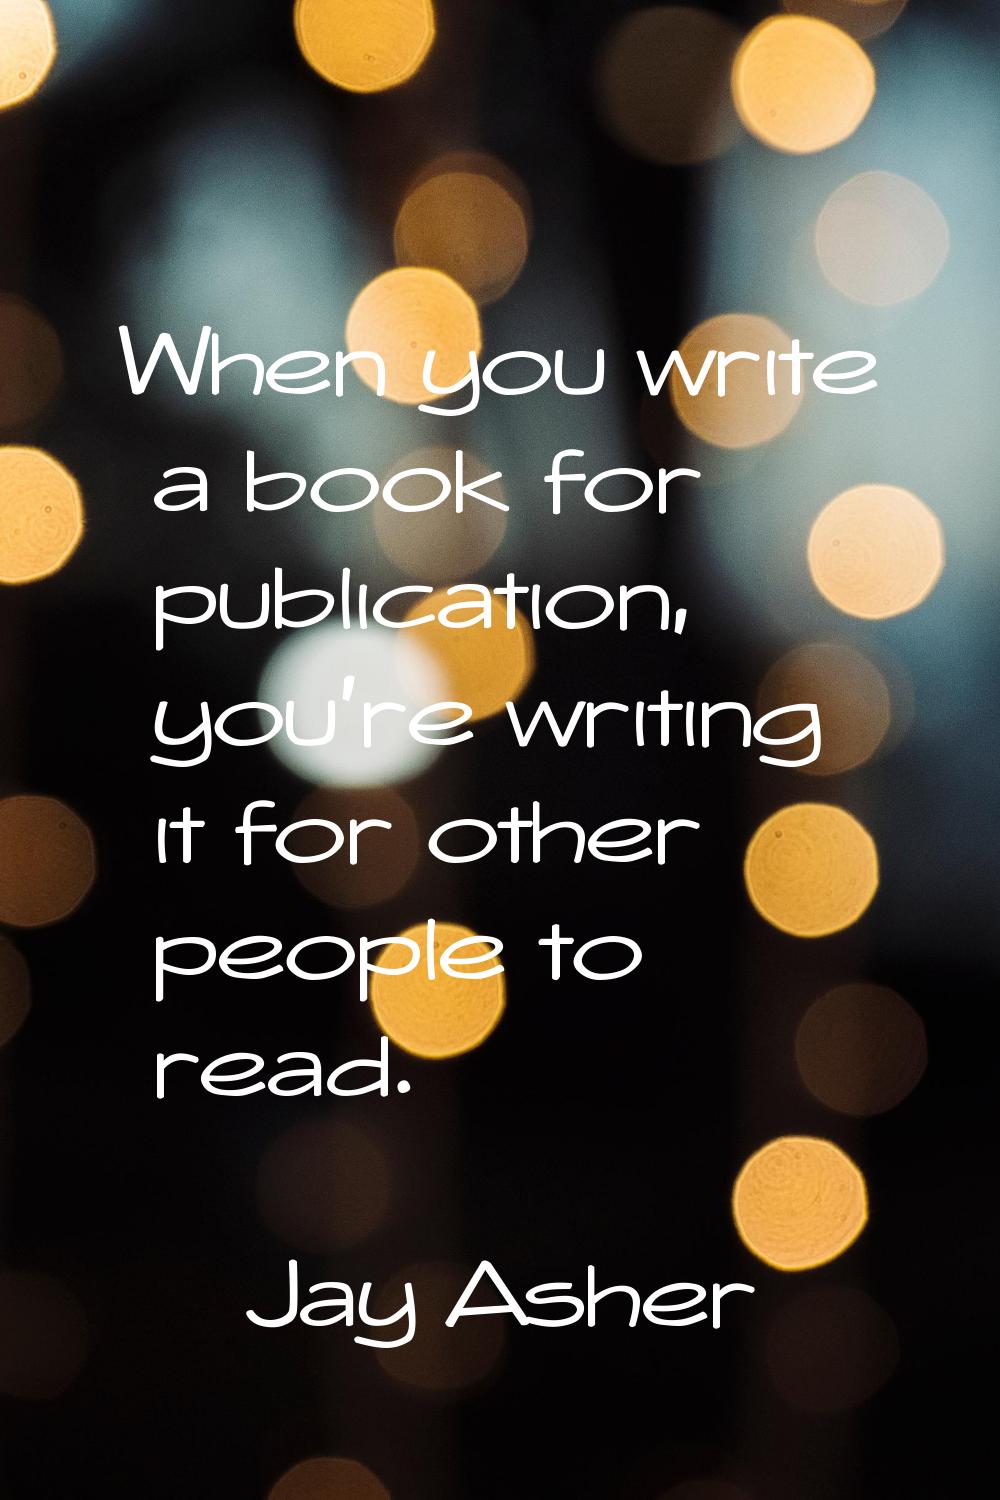 When you write a book for publication, you're writing it for other people to read.